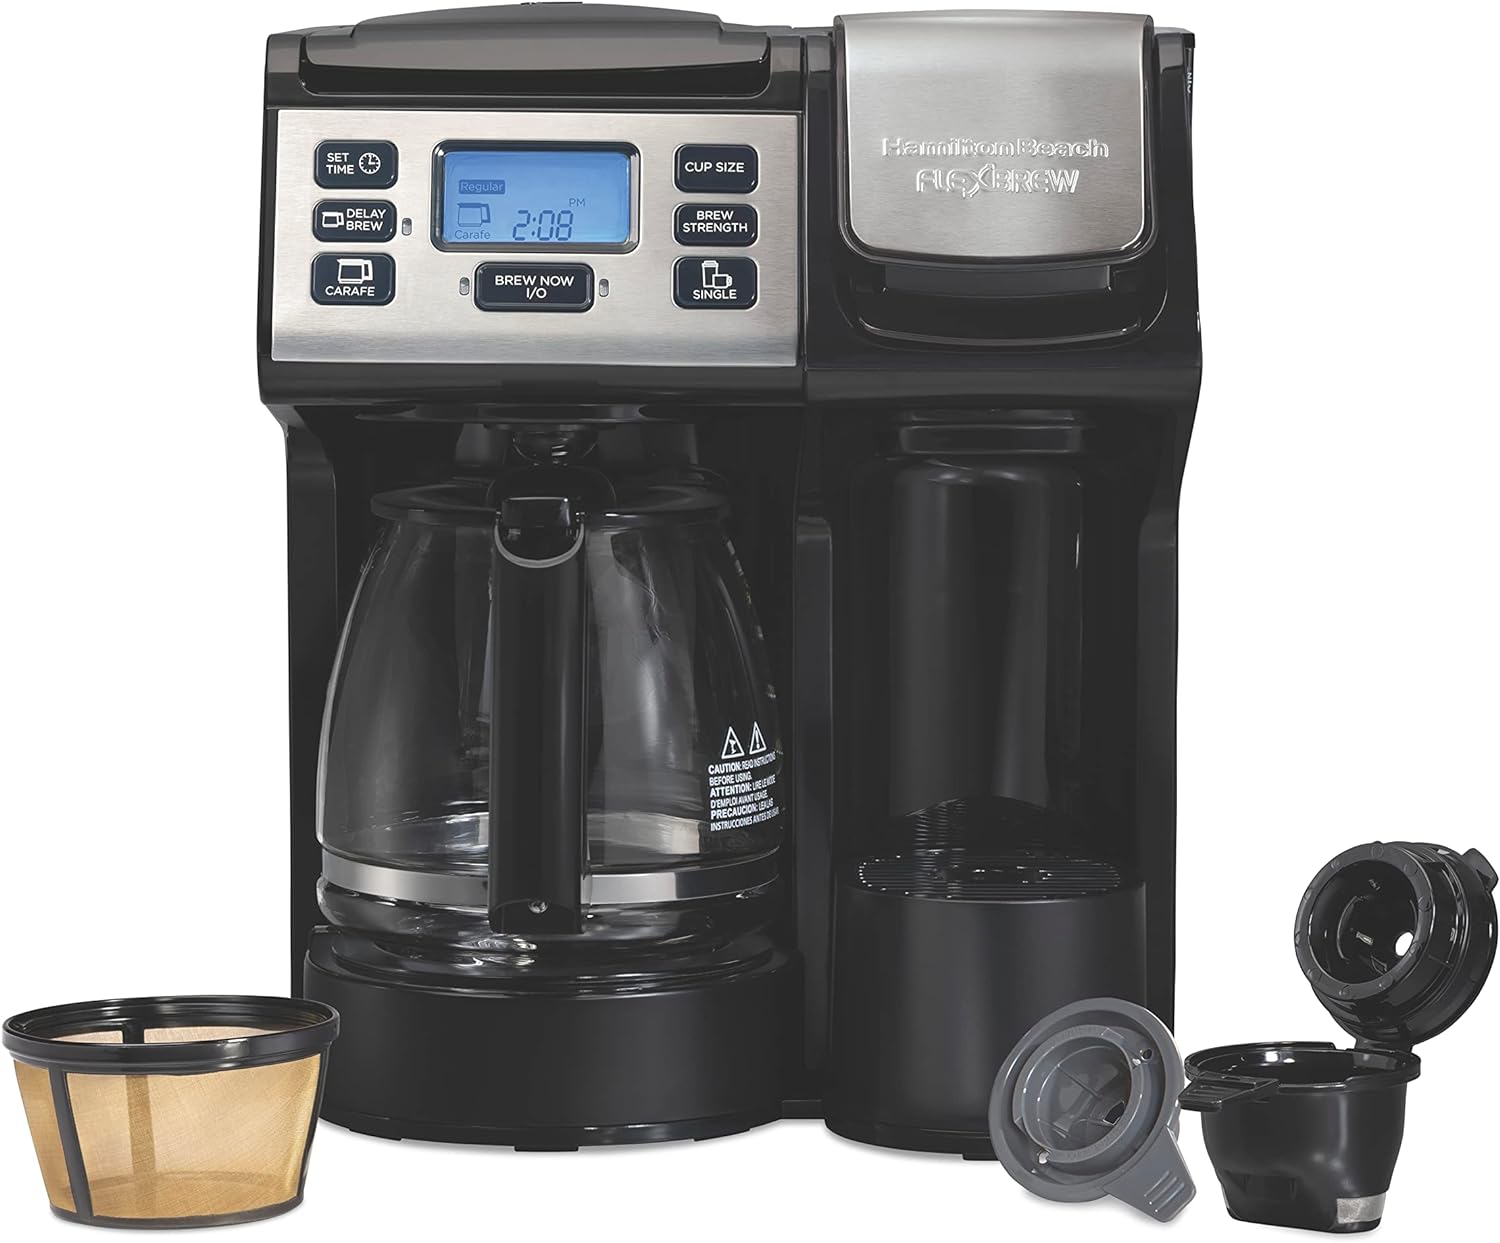 Hamilton Beach 49915 FlexBrew Trio 2-Way Coffee Maker, Compatible with K-Cup Pods or Grounds, Single Serve & Full 12c Pot, Black with Stainless Steel Accents, Fast Brewing